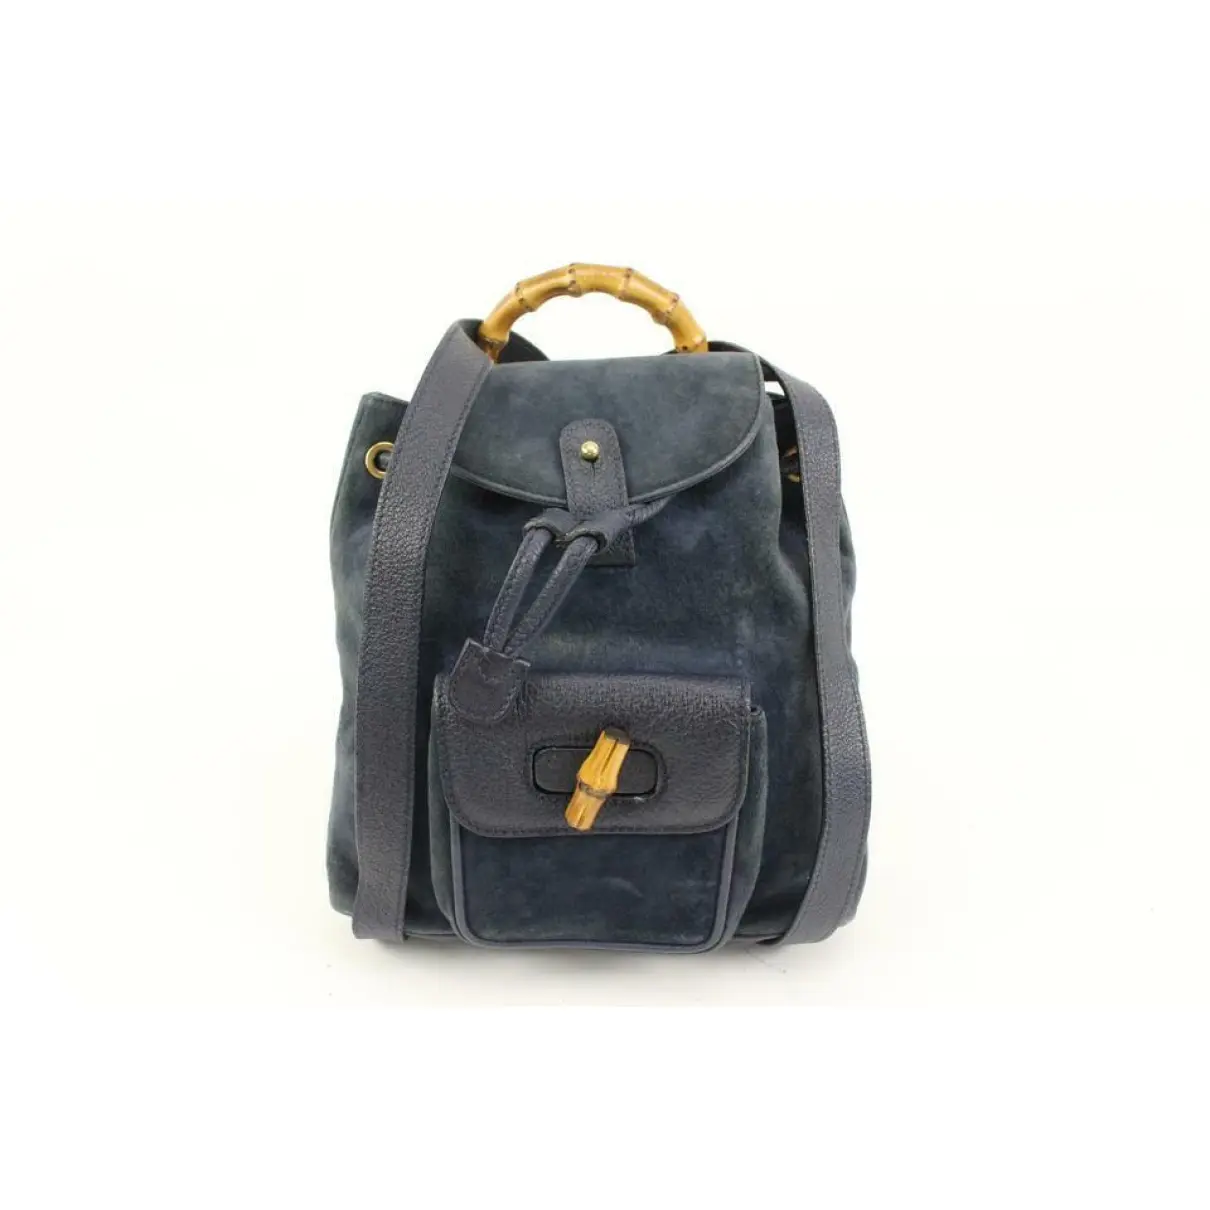 Bamboo leather backpack Gucci